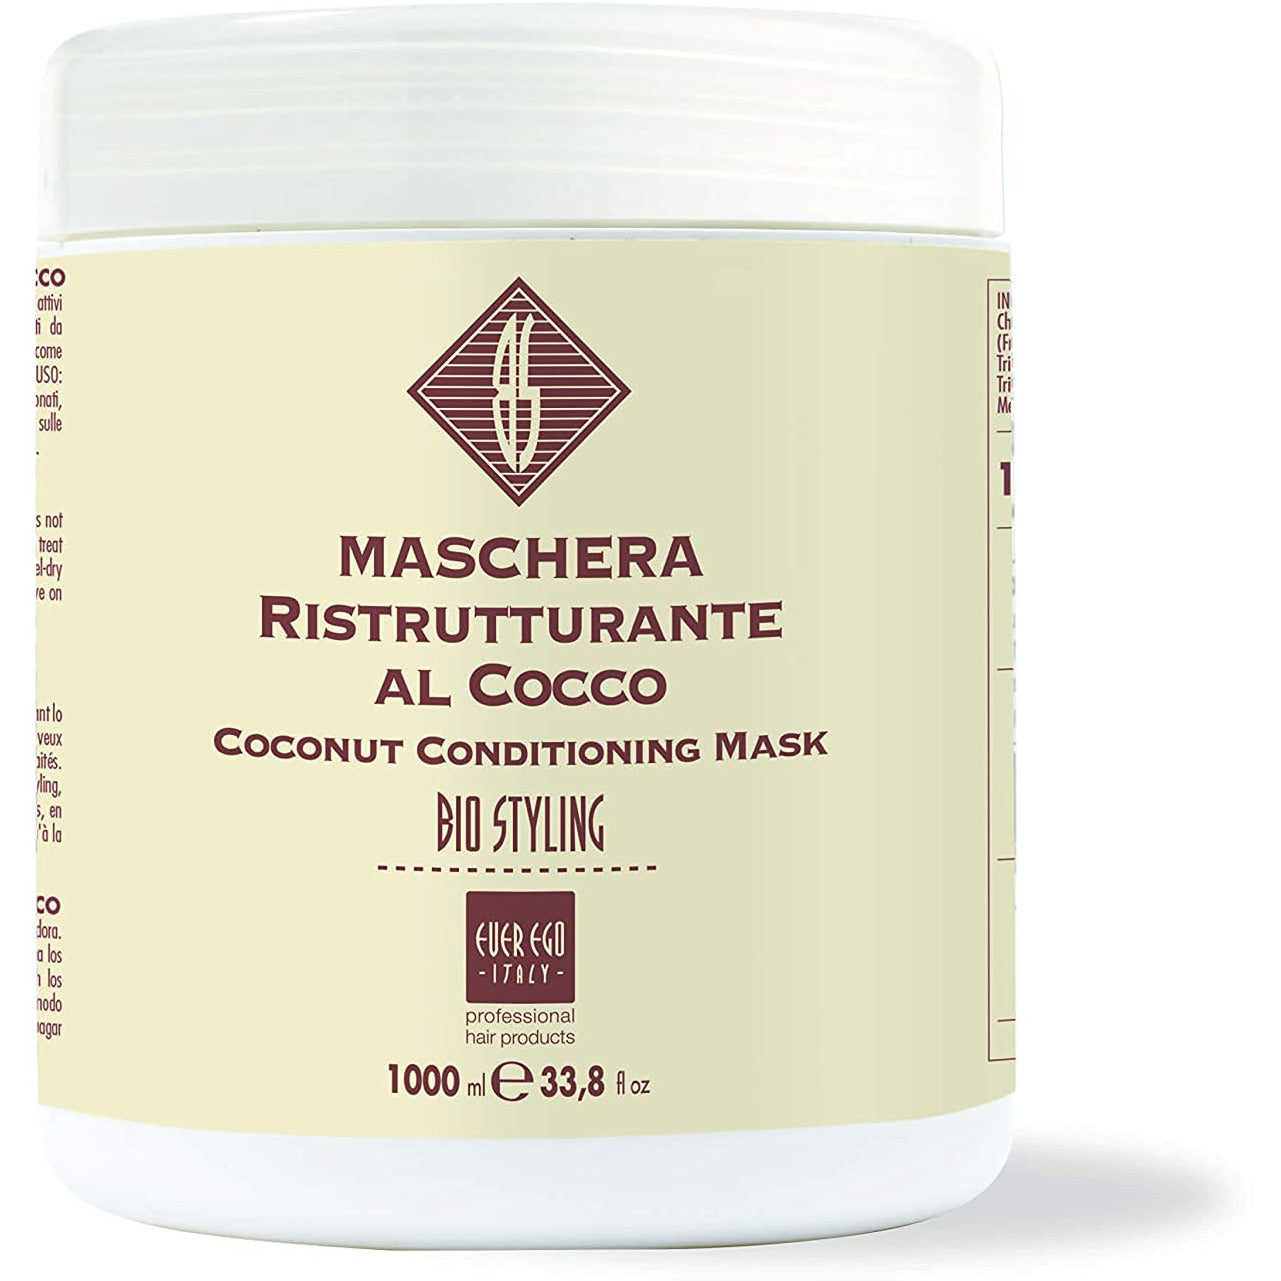 Ever Ego Italy Coconut Conditioning Mask, 33.8 Oz